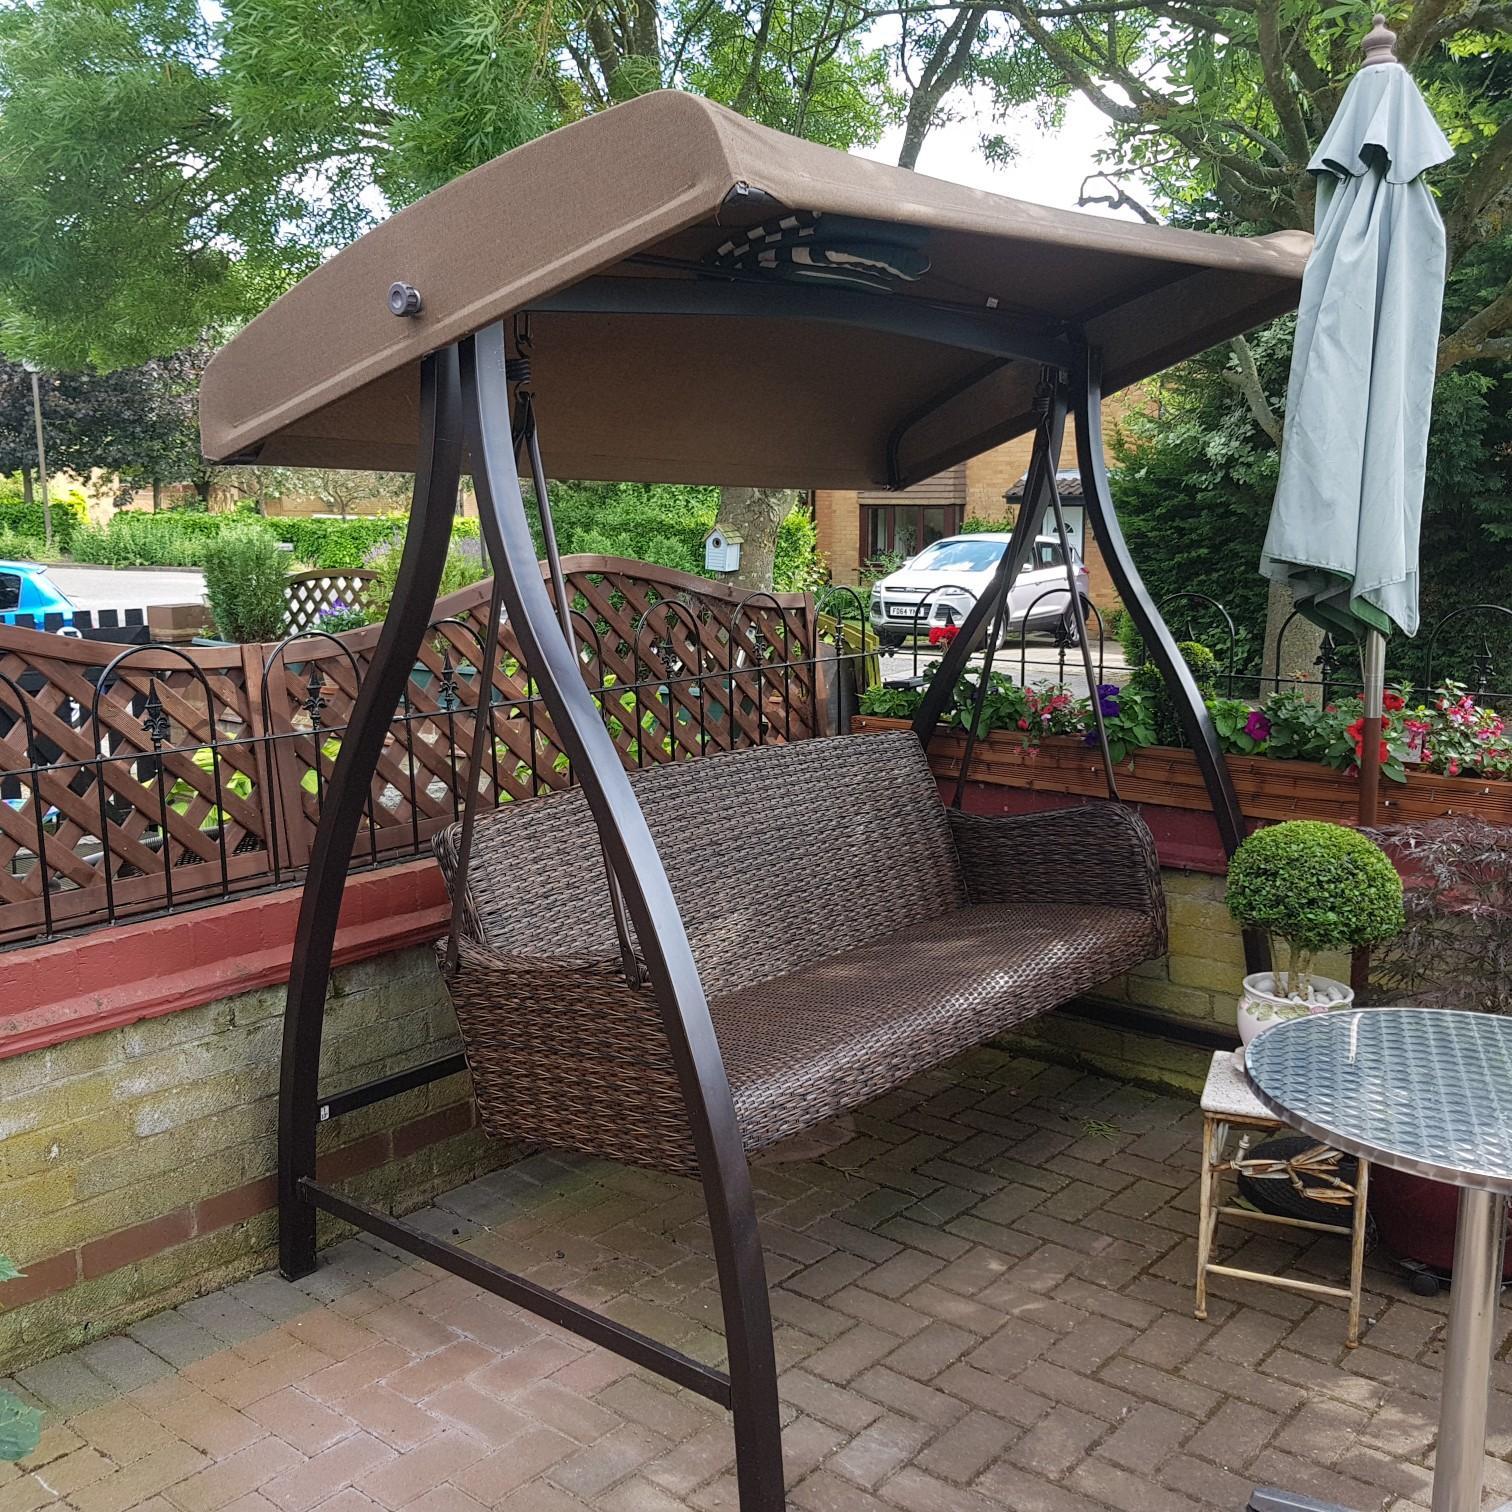 COSTCO 3 Seater Garden Swing Chair in Wolverton for £250